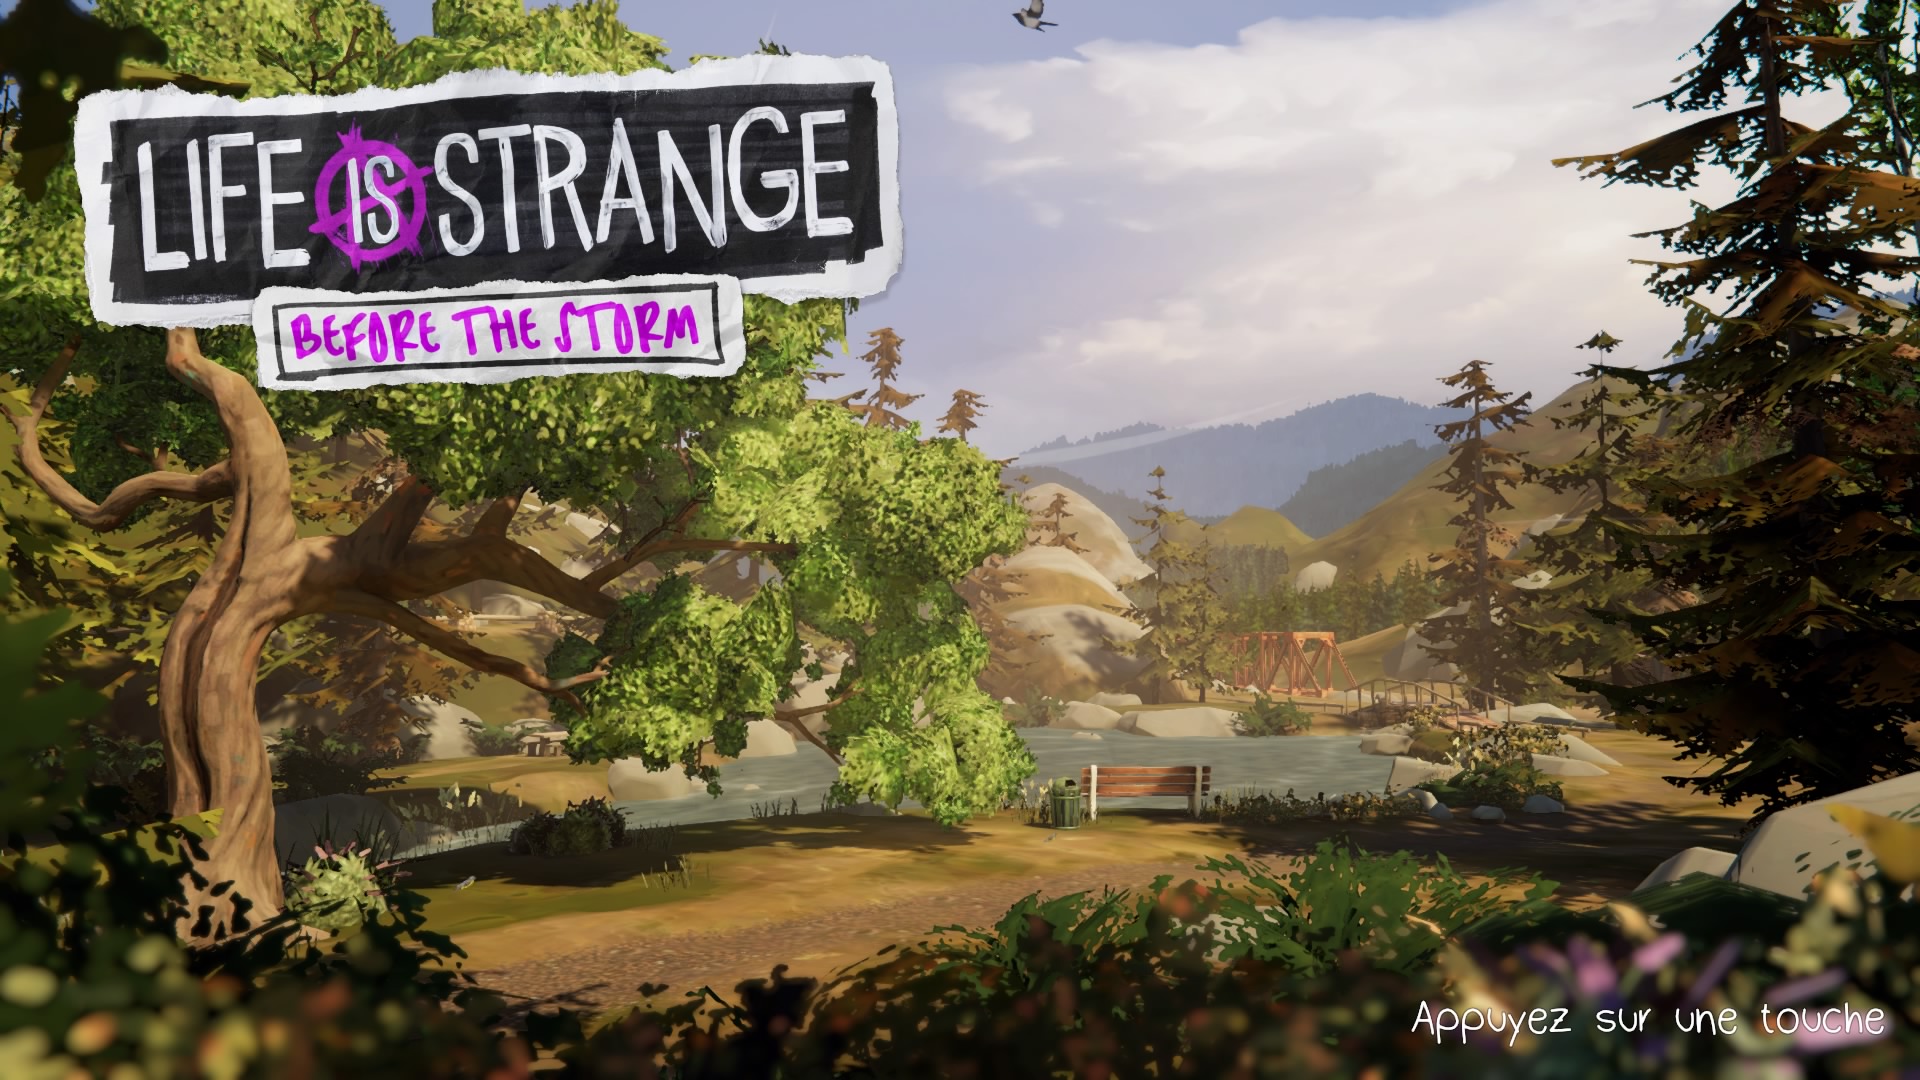 Life is Strange Before the Storm (2017 – Aventure interactive – Playstation 4)